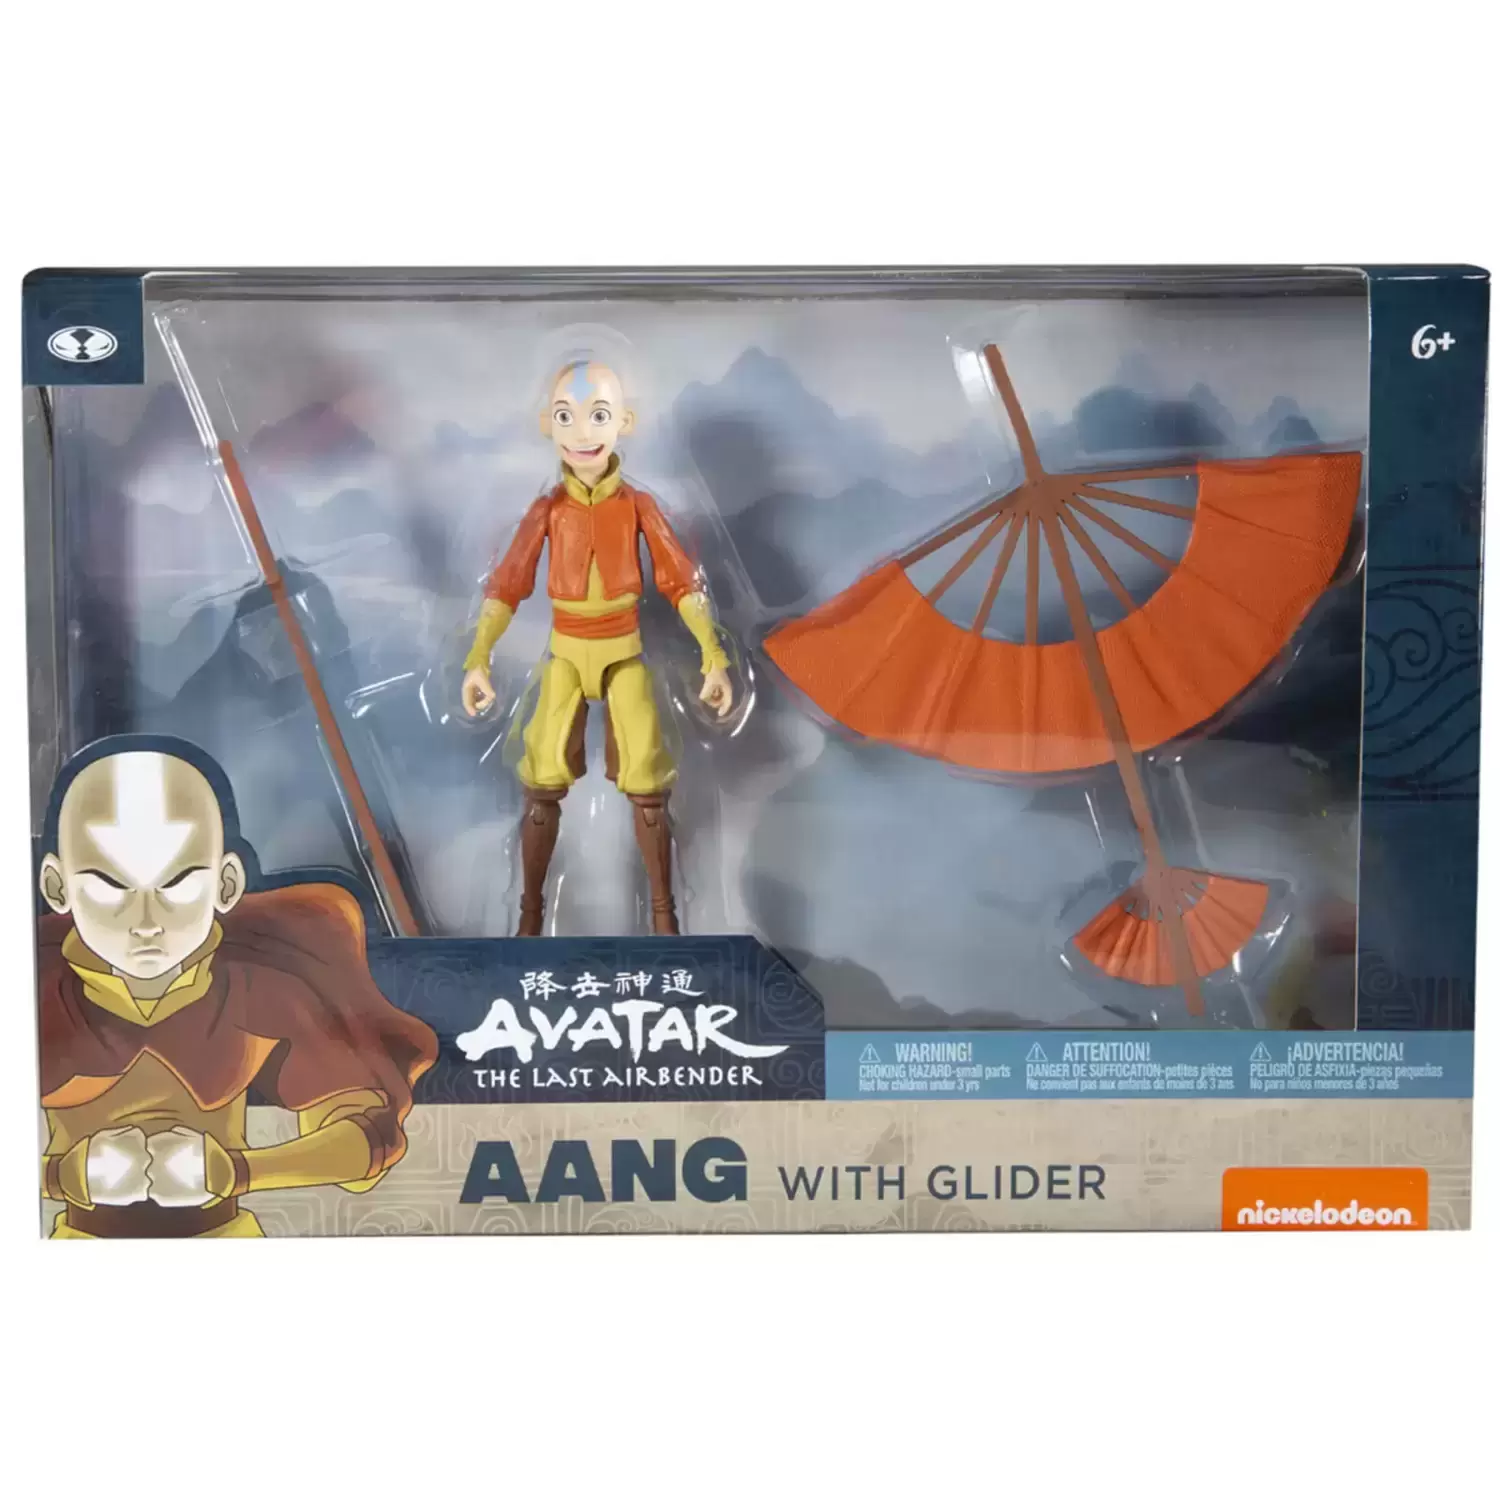 McFarlane - Avatar, the last Airbender - Aang With Glider